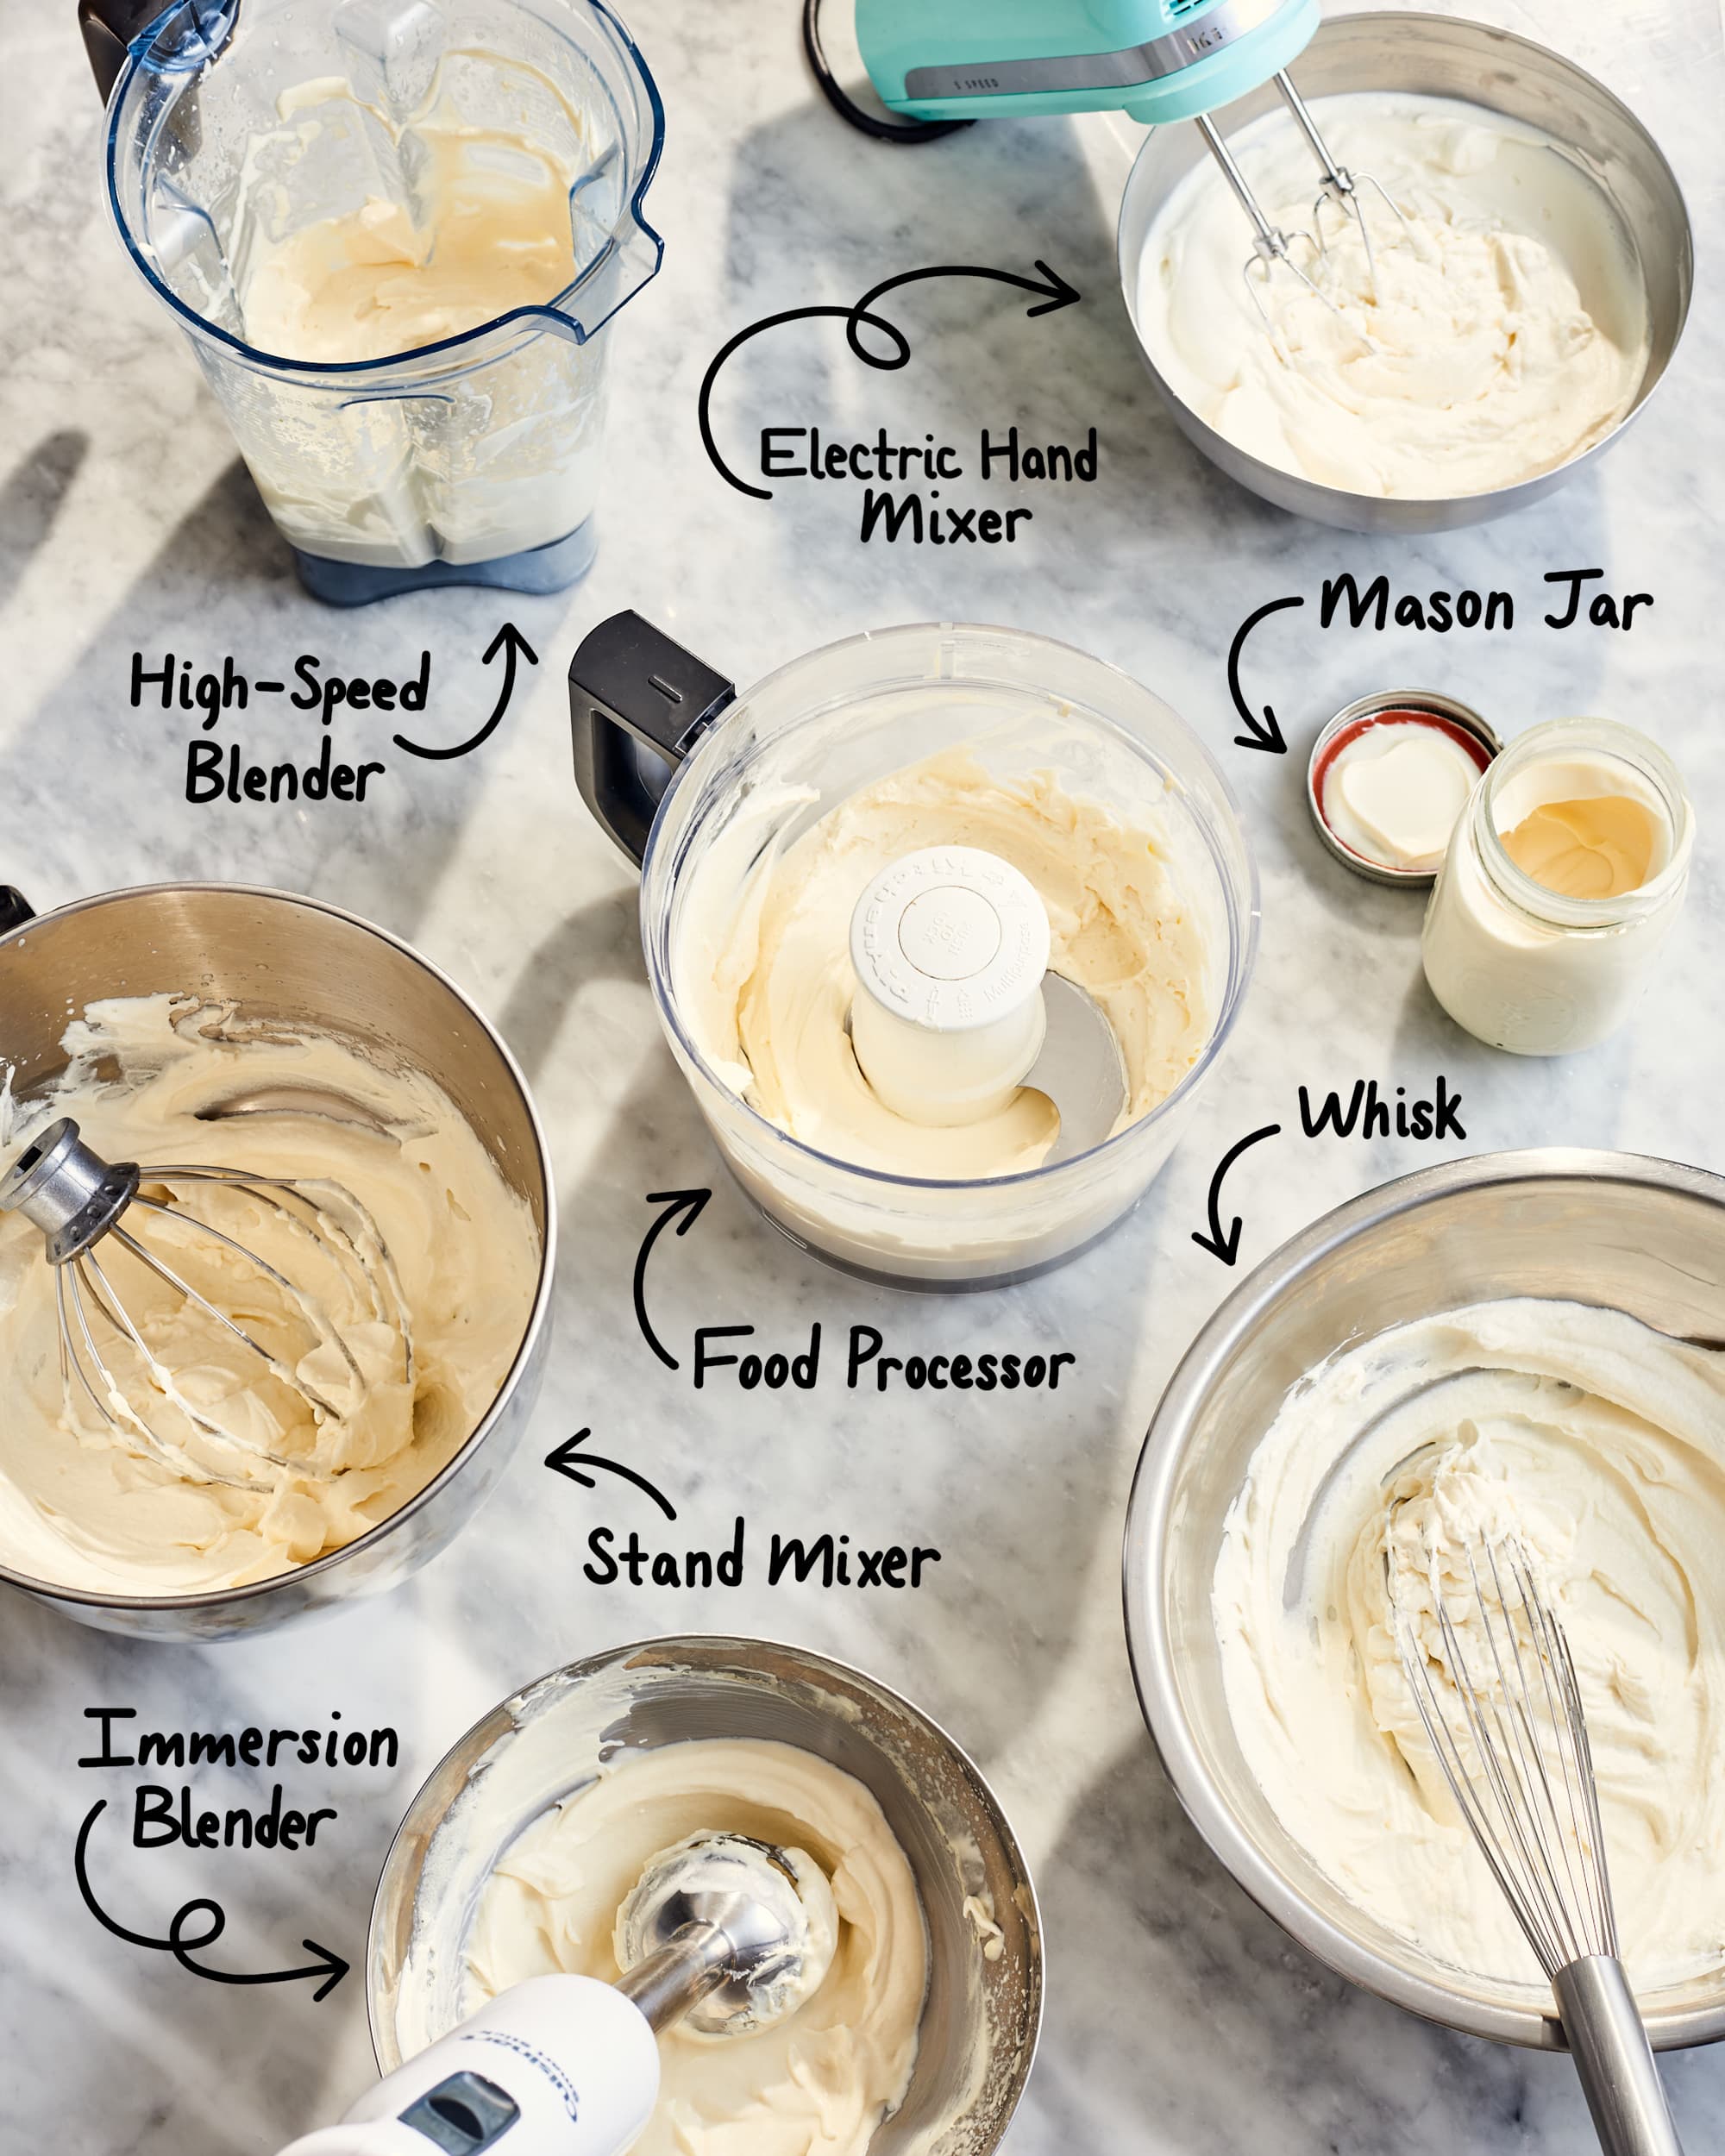 How to Whip Cream by Hand